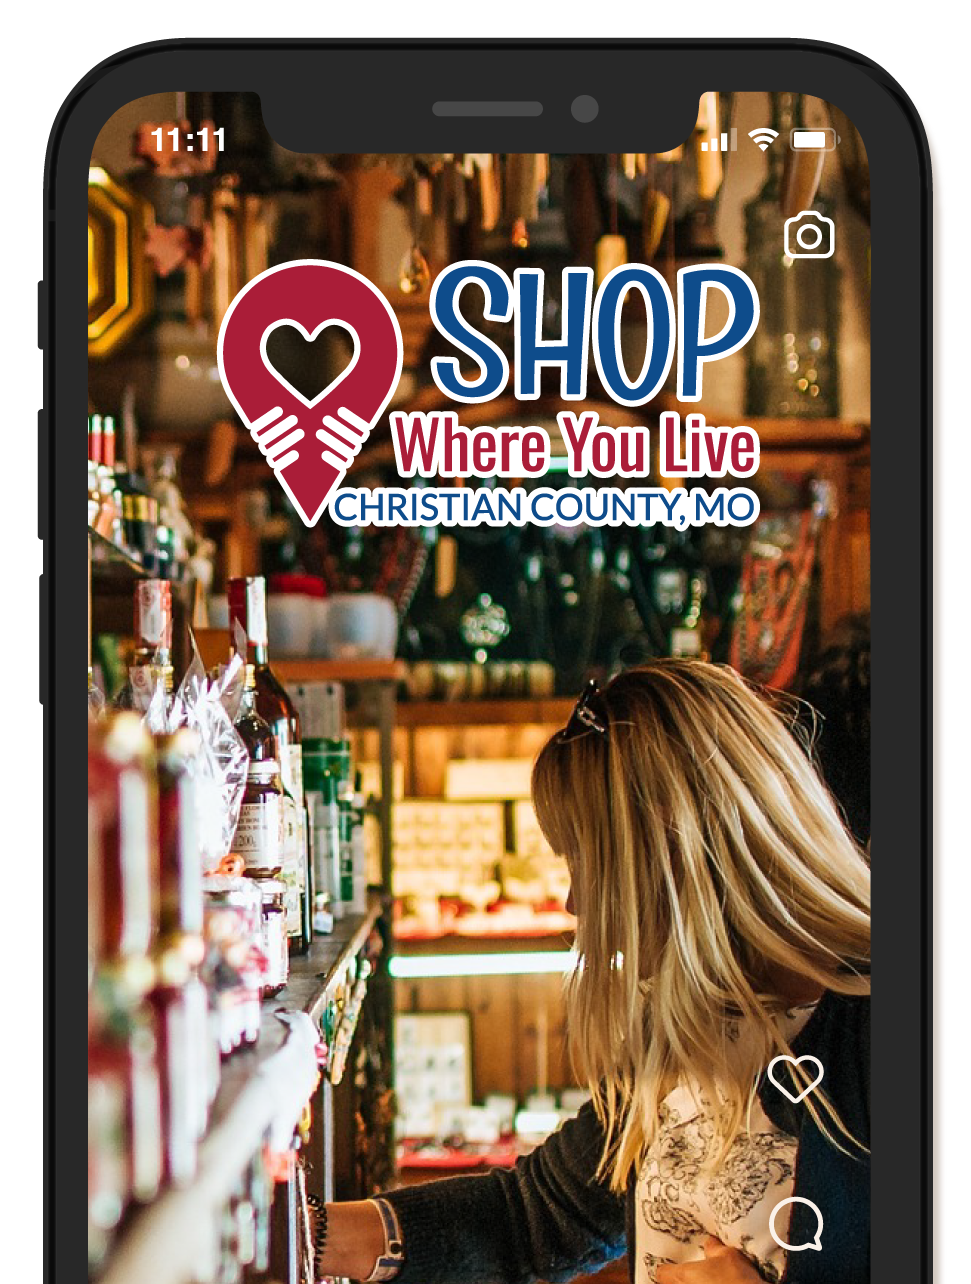 Social media story mockup that features the Shop Where You Live Logo